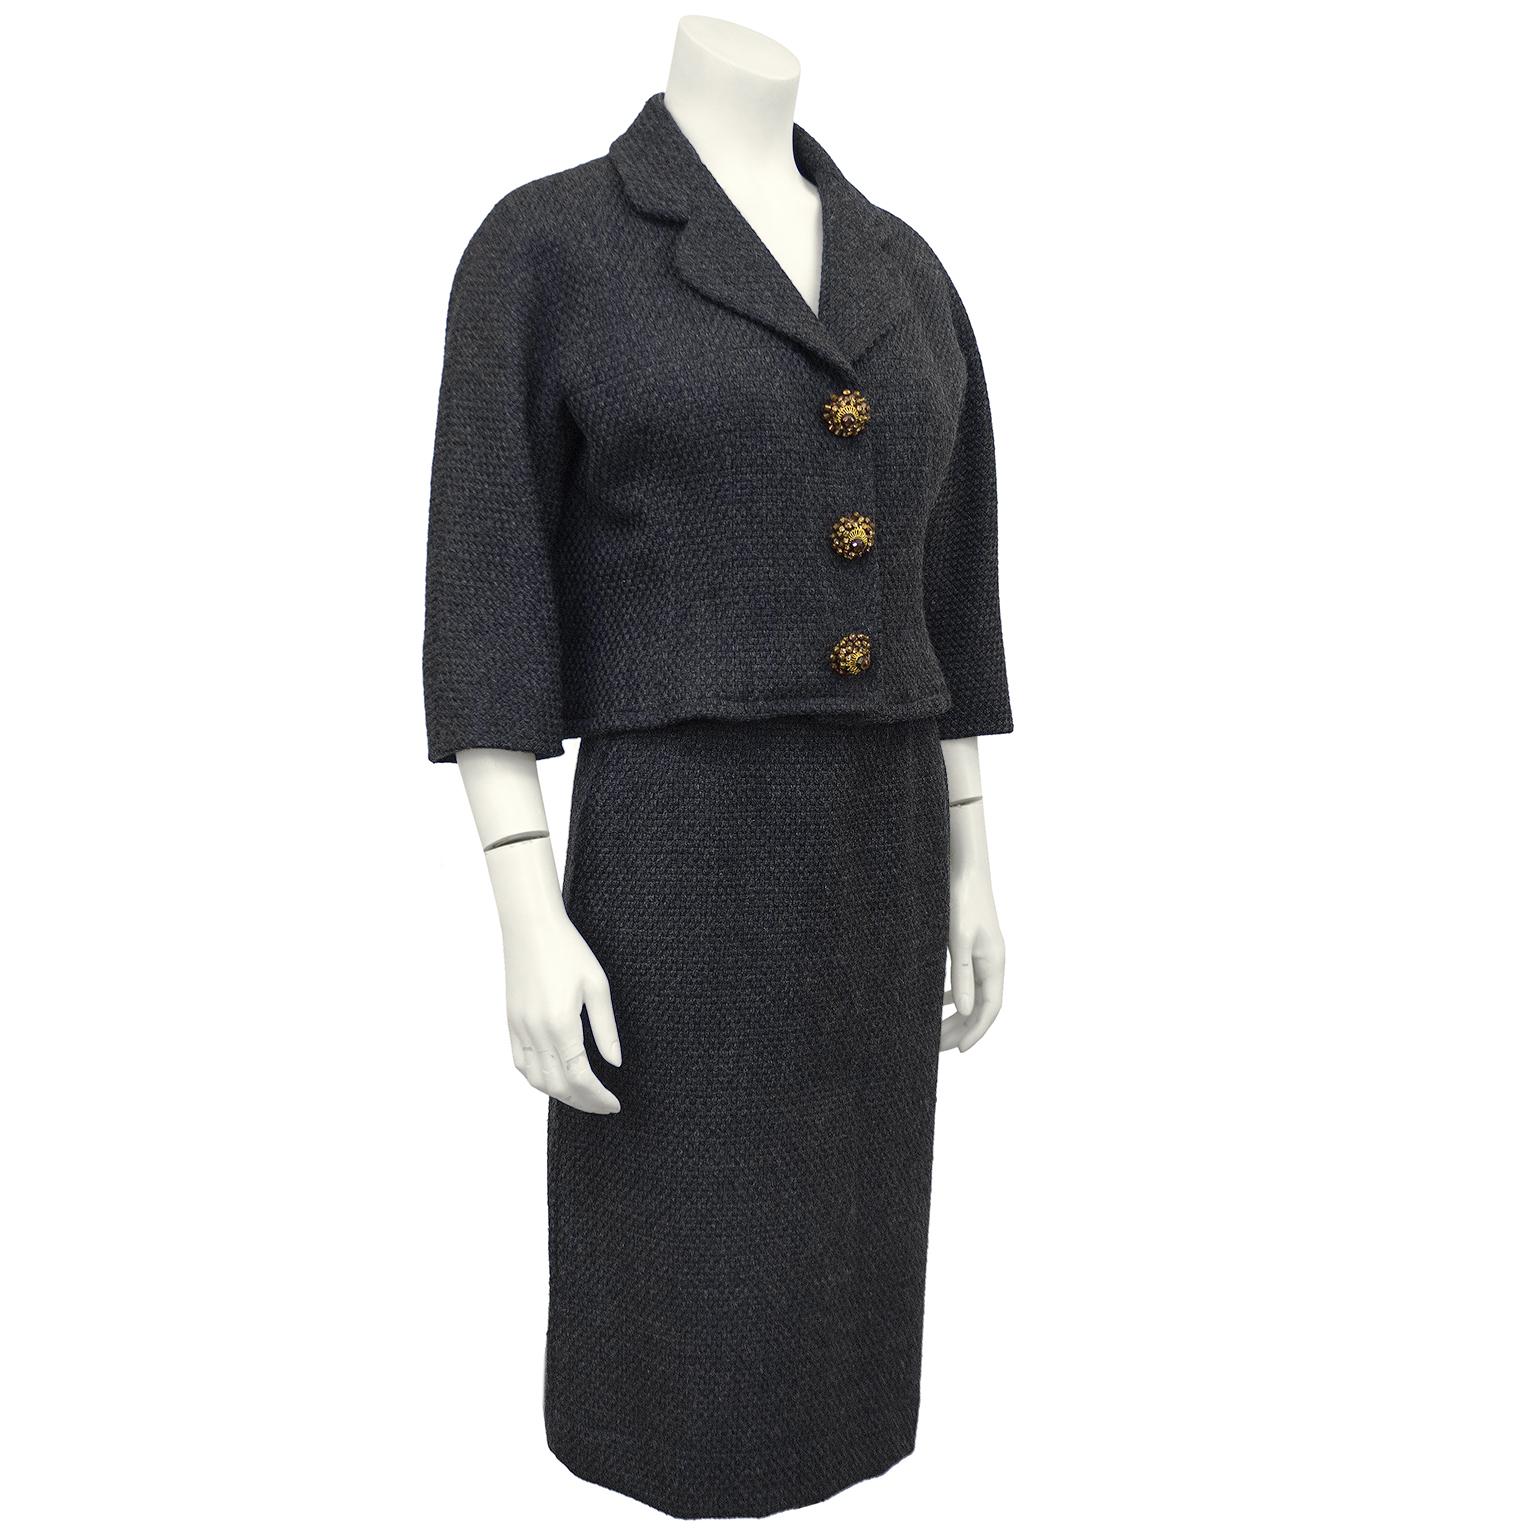 1950s Balenciaga dark gray heavy woven wool boucle skirt suit with oversized jewelled buttons. The cut of the jacket is indicative of 1950s Balenciaga with the wide cropped sleeves and the hem hitting at the high waist. The jewelled accent buttons